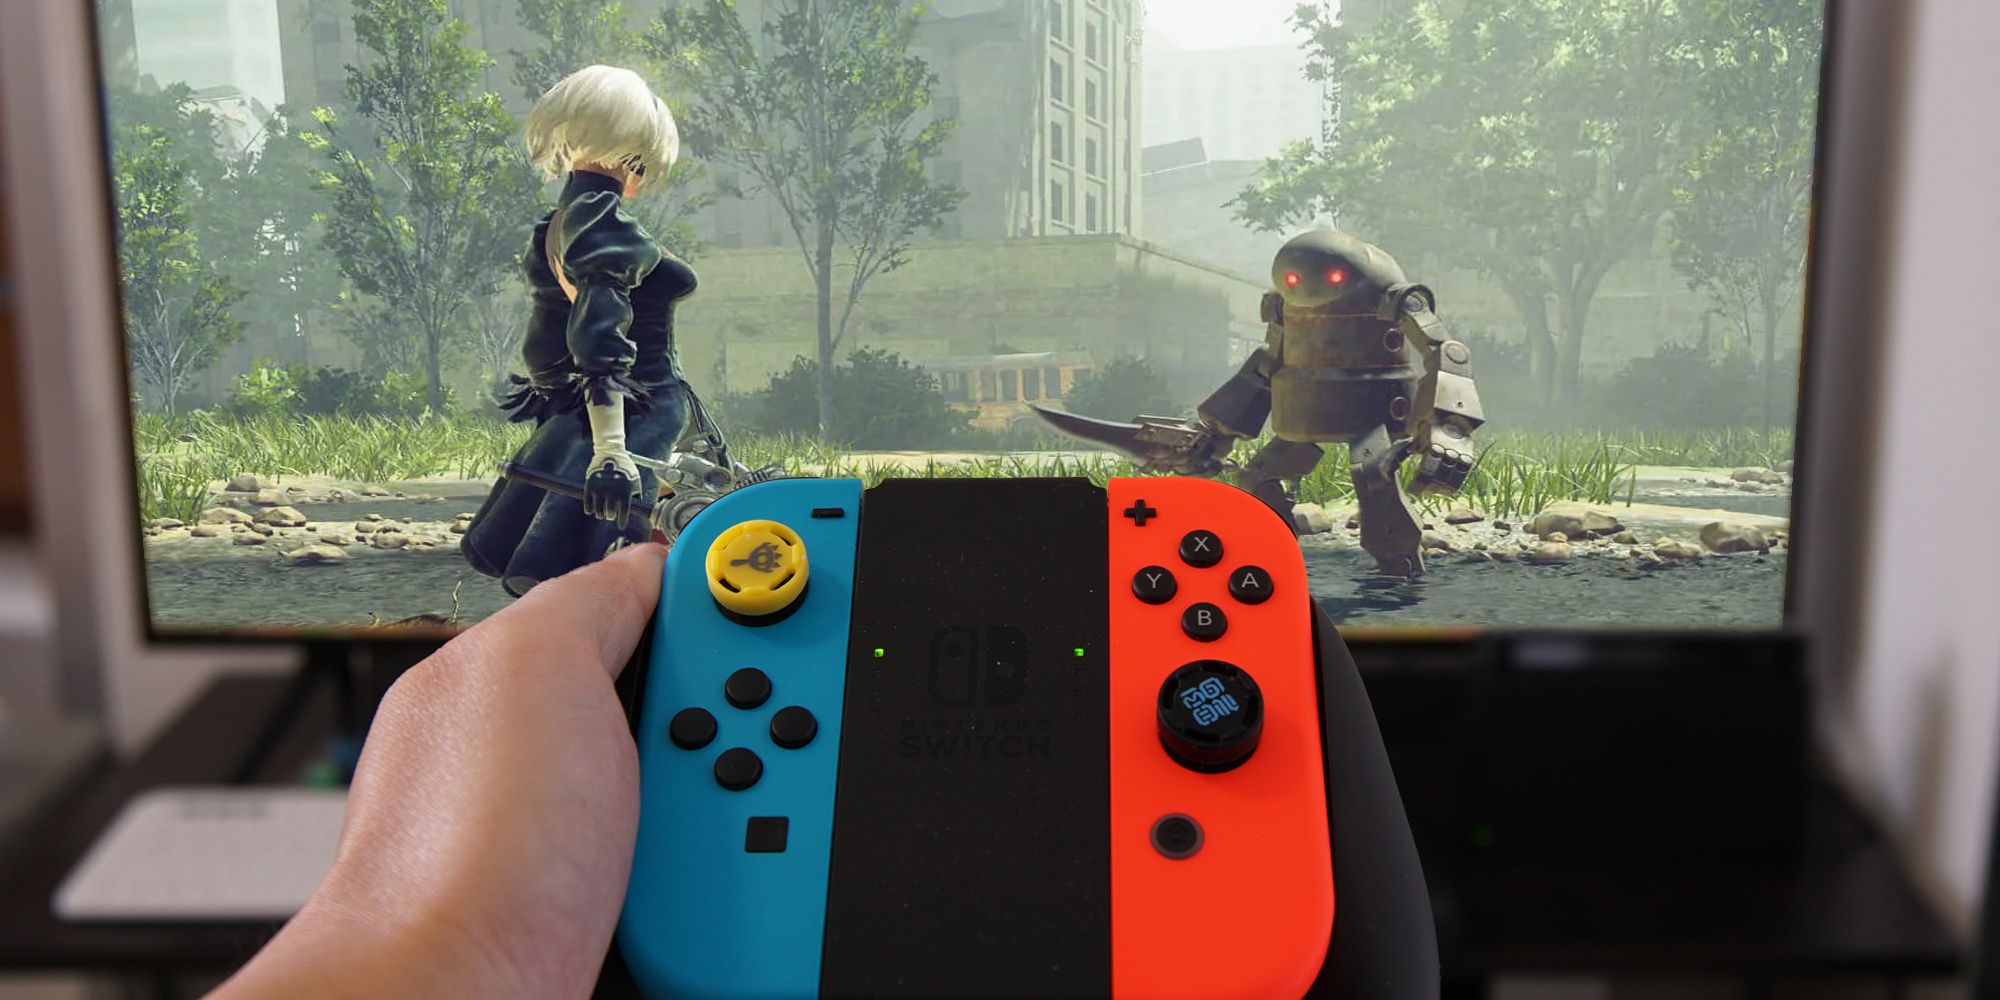 NieR: Automata's performance on Nintendo Switch exceeded my expectations